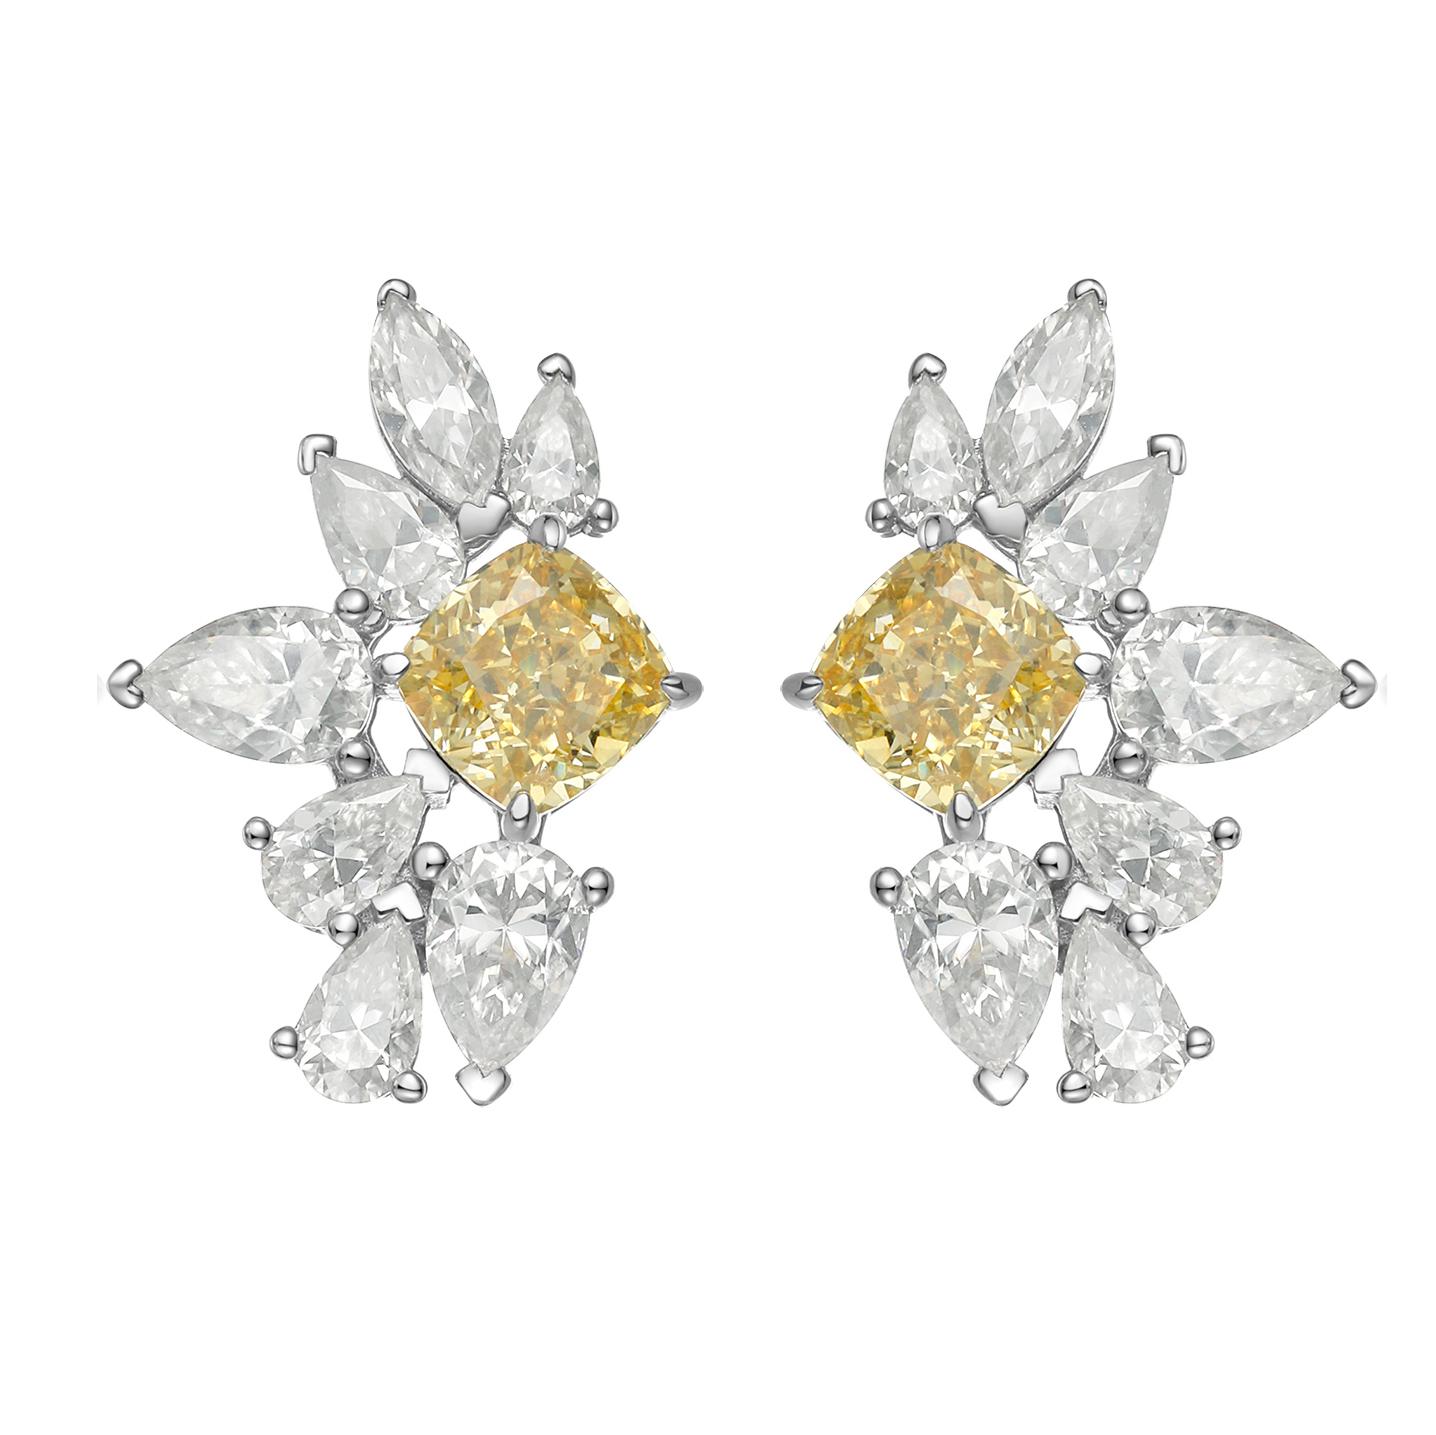 These mesmerizing fancy yellow canary earrings are custom made to perfection! The gorgeous matching radiant cut diamonds have a beautiful medium canary yellow color. These earrings are set in 14k white gold and are surrounded by numerous stunning